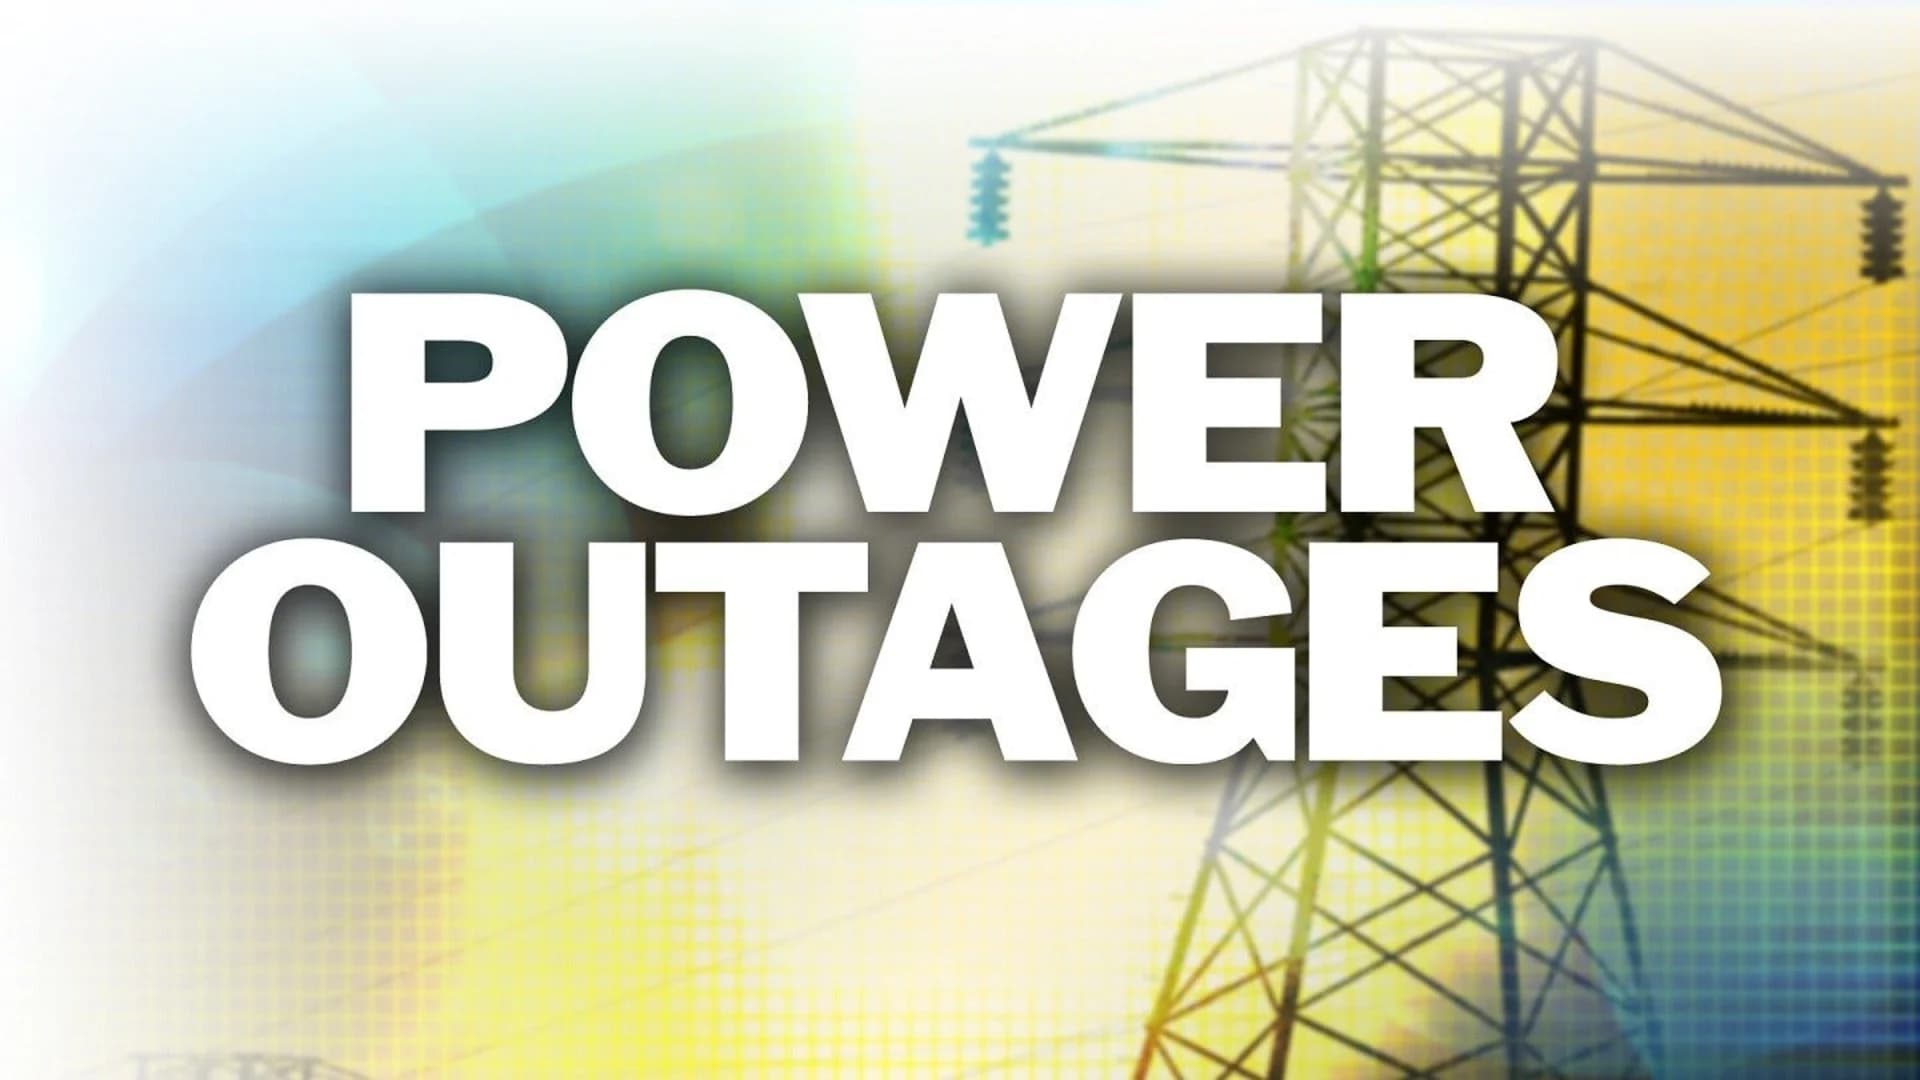 Helpful Links - Power outages in New Jersey